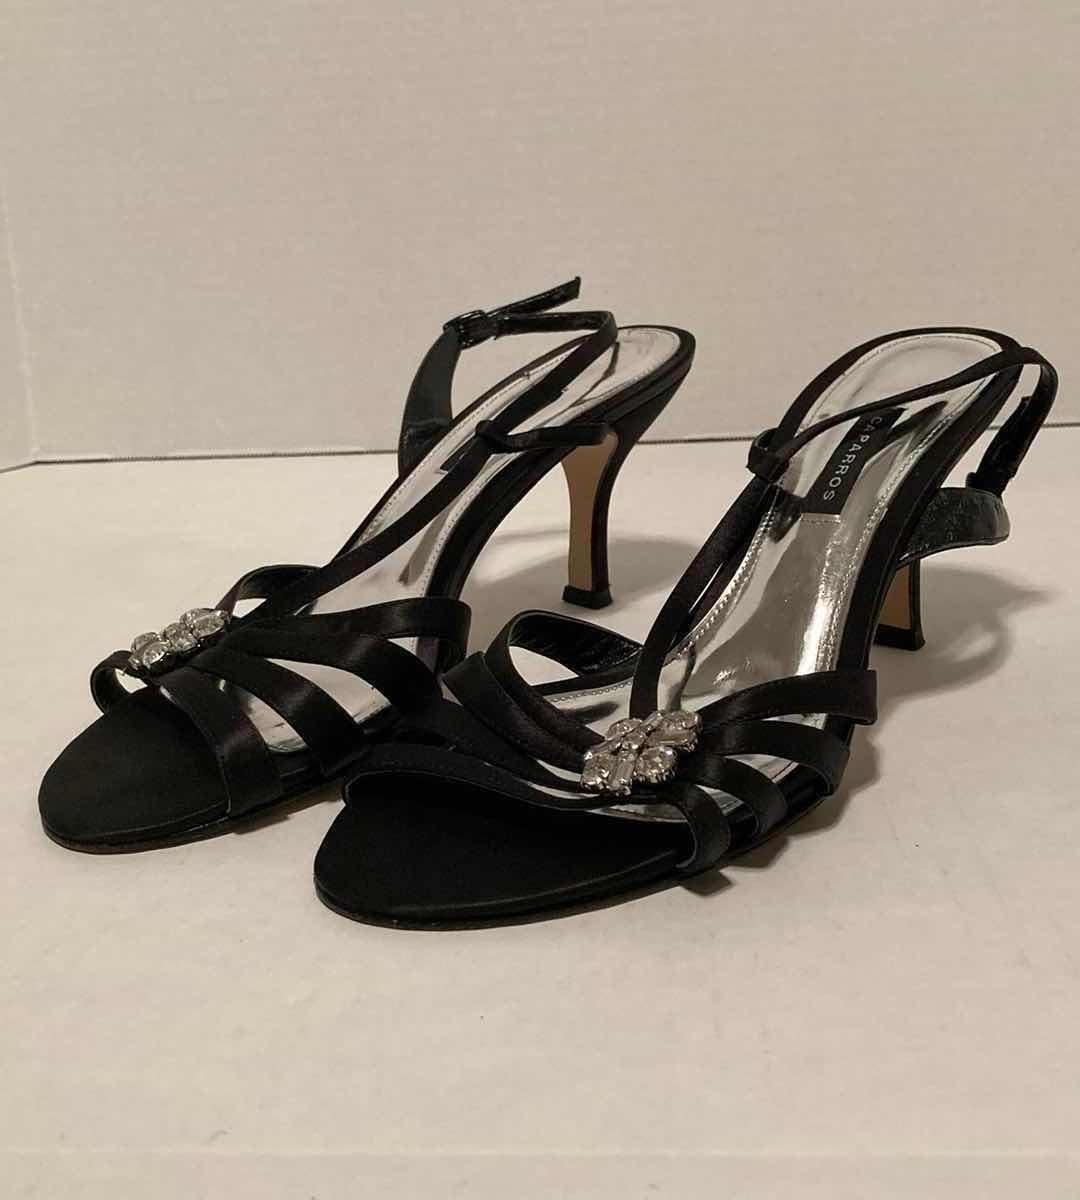 Photo 1 of CAPARROS BLACK OPEN TOE HEELS & COLE HAAN BLACK WOVEN LEATHER LOAFERS WOMEN’S SIZE 8-8.5